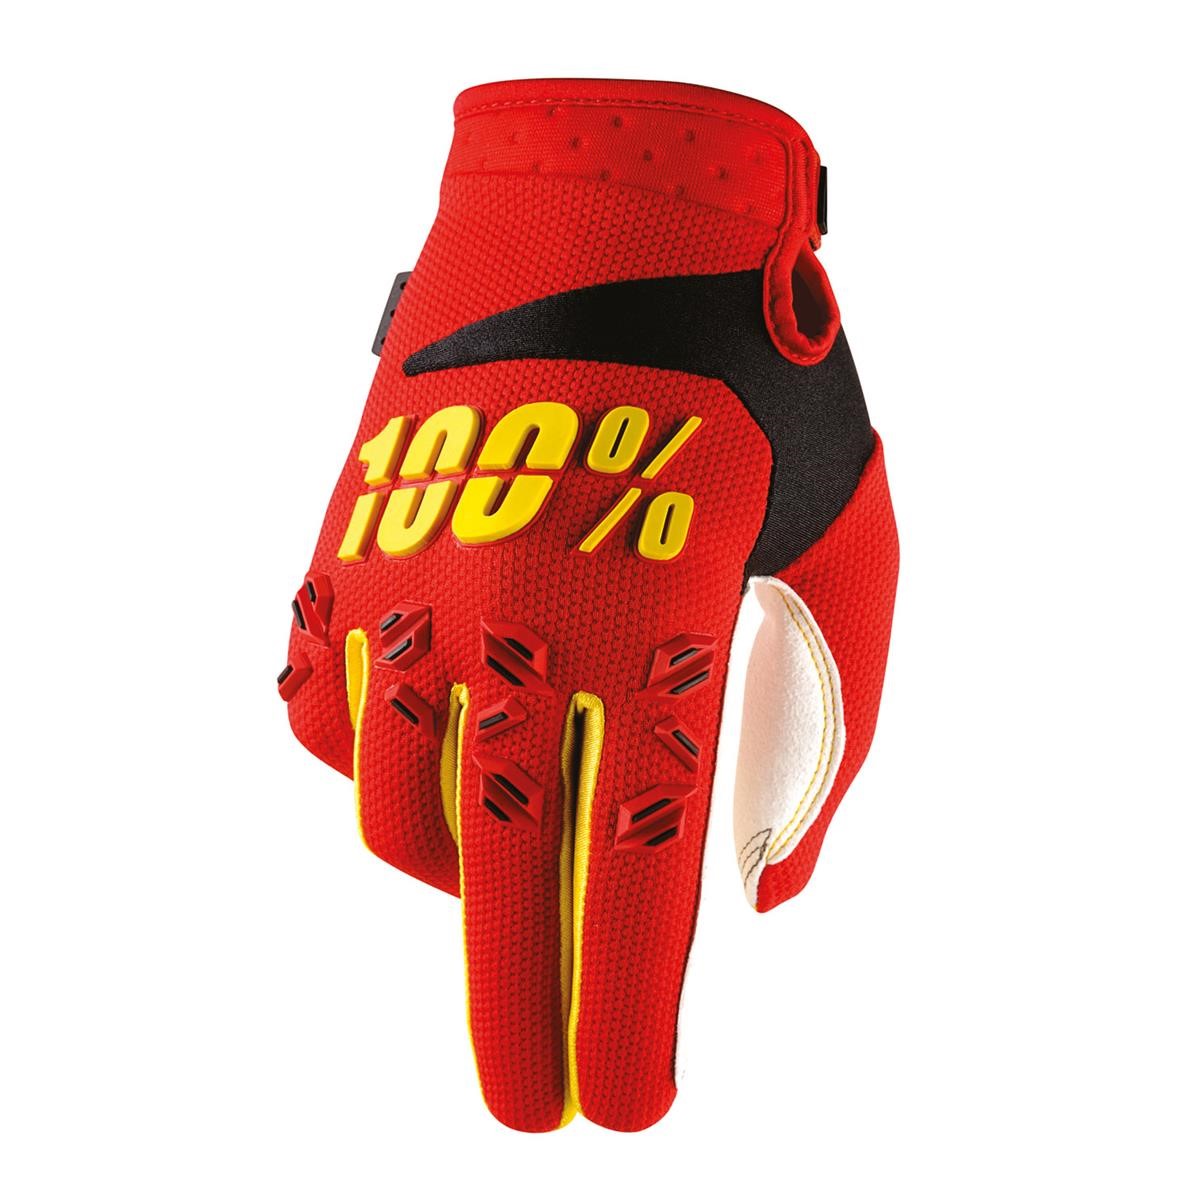 100% Gloves Airmatic Red